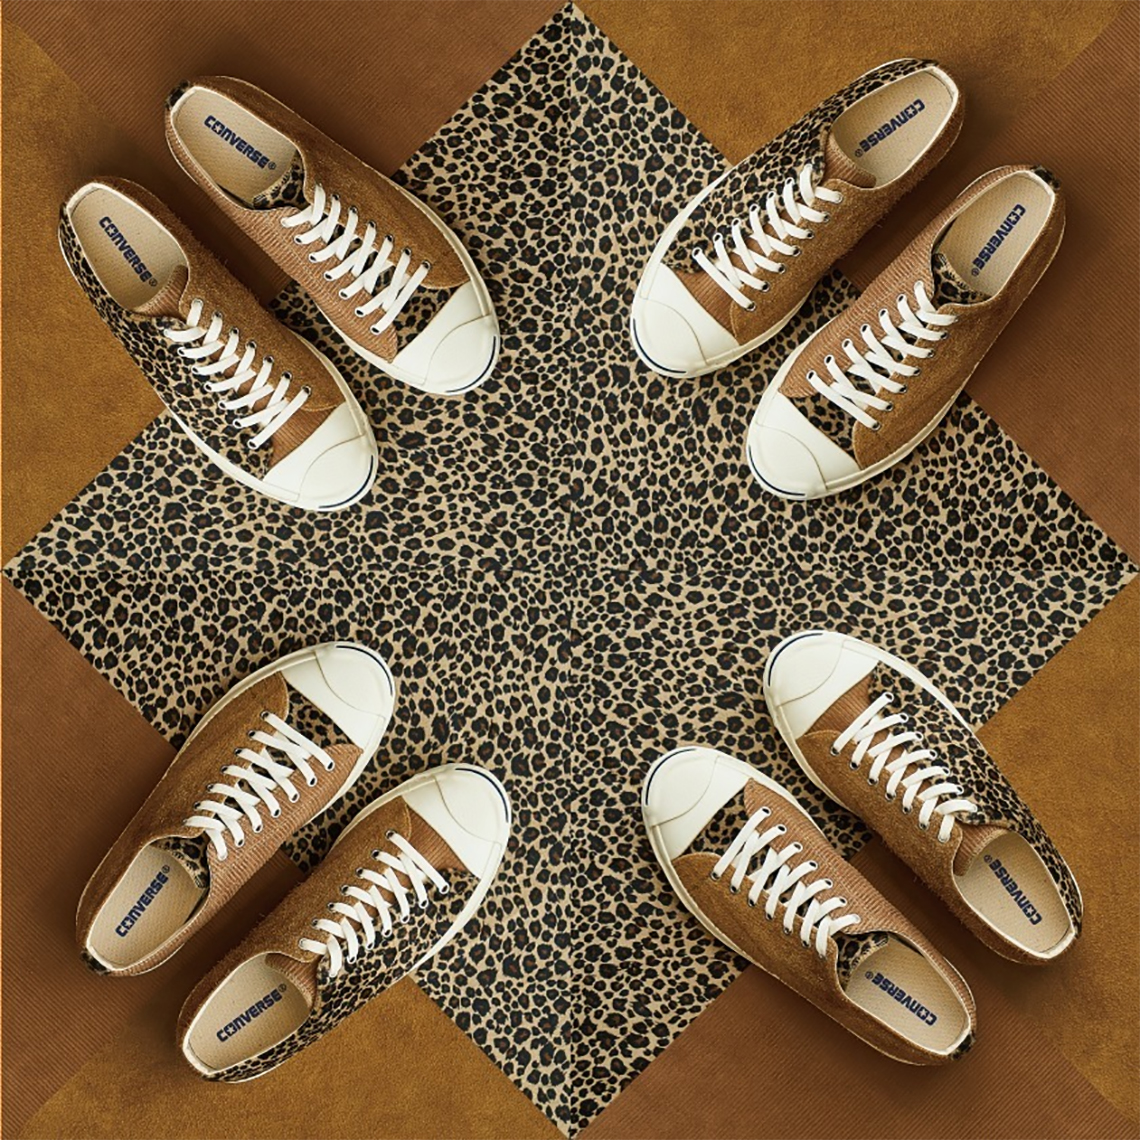 Billy's x Converse Jack Purcell Blend Leopard | SneakerNews.com